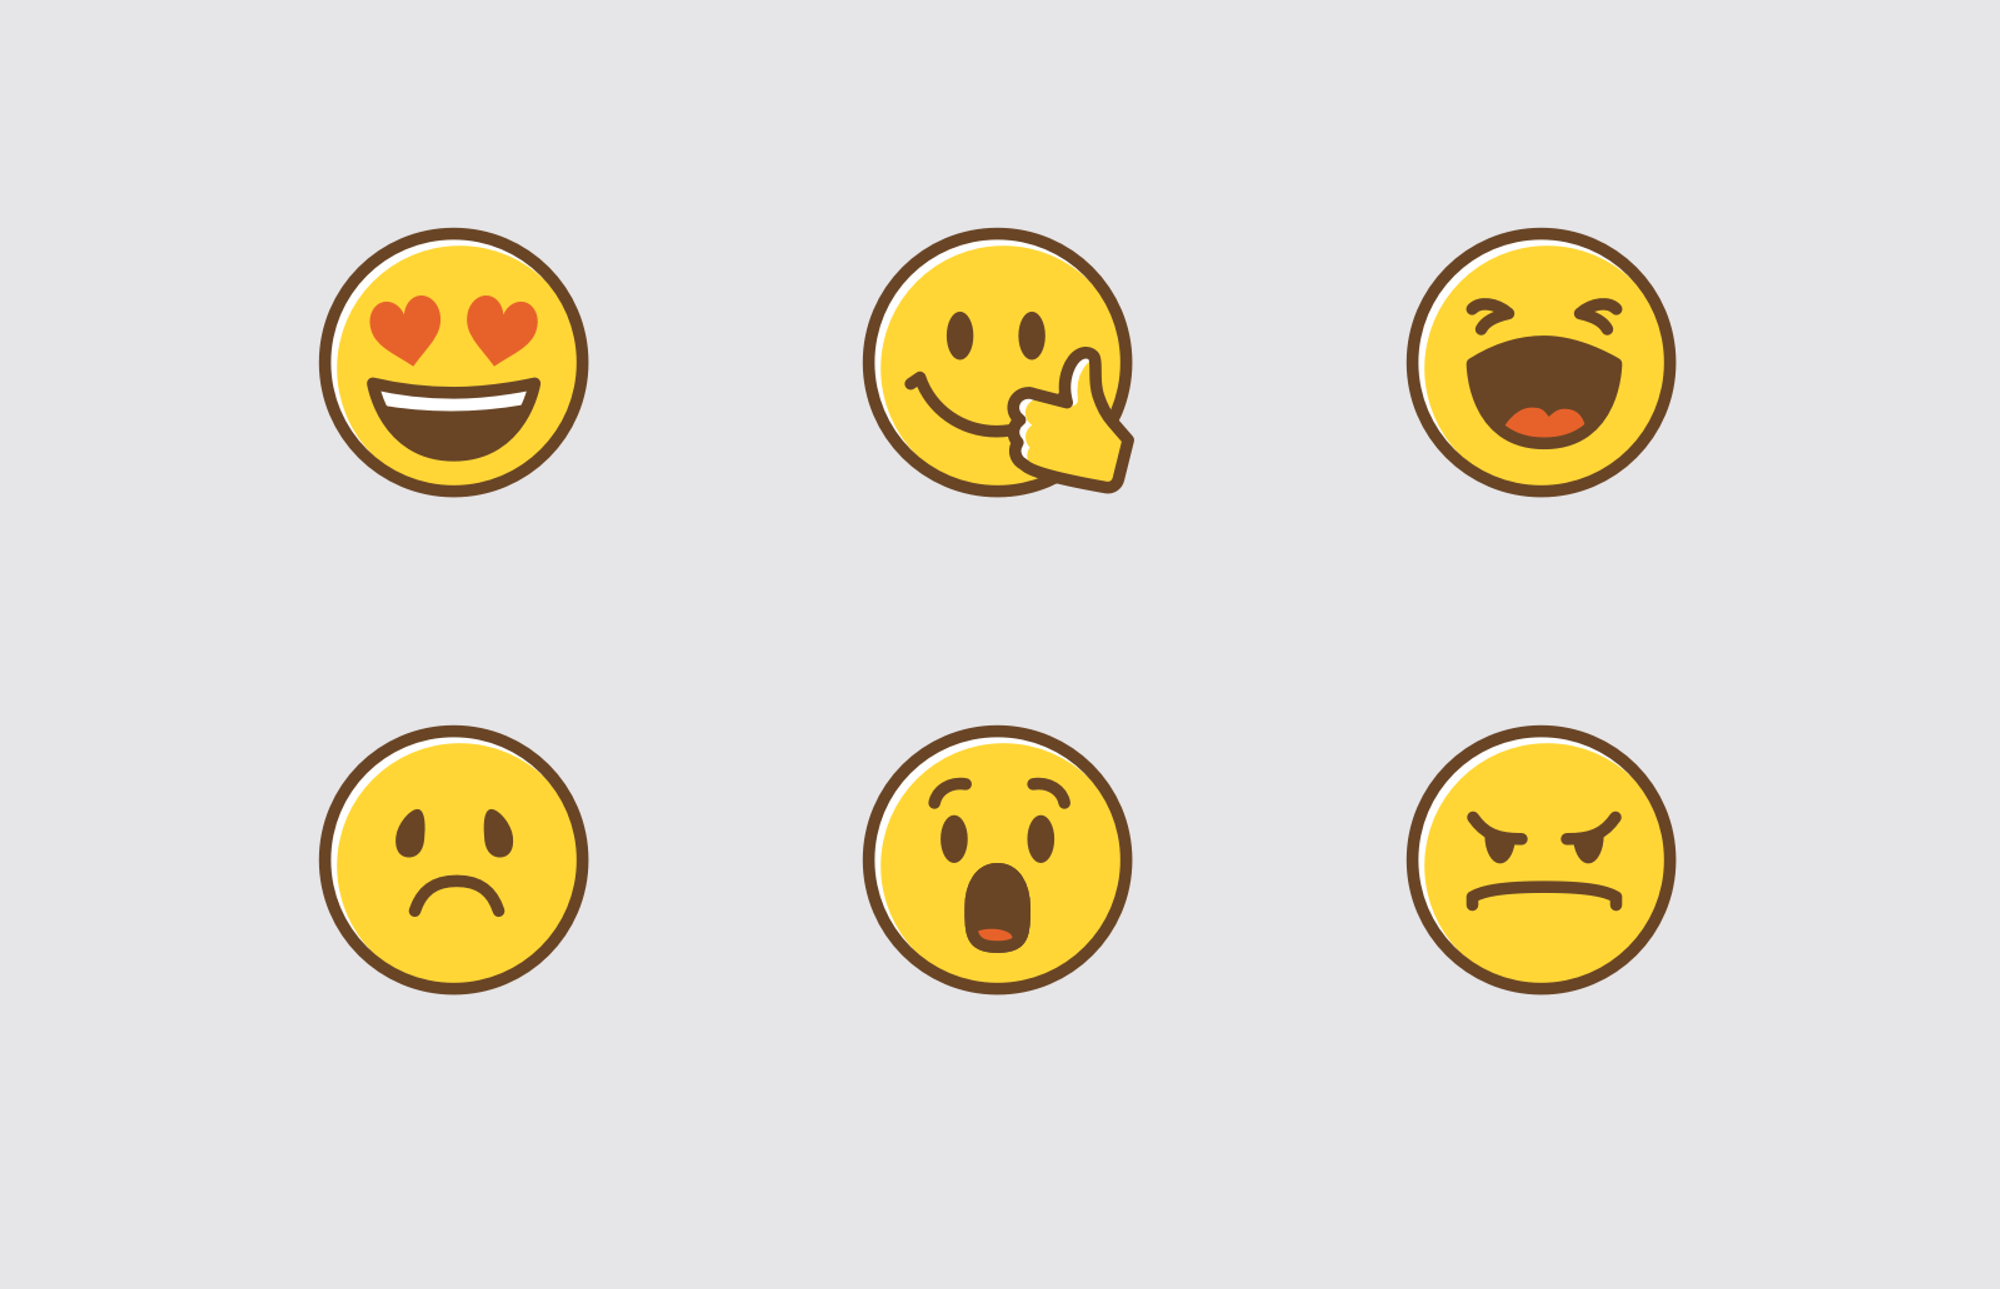 A selection of my Bananatag reaction emoji, from heart eyes to thumbs up to grumpy face